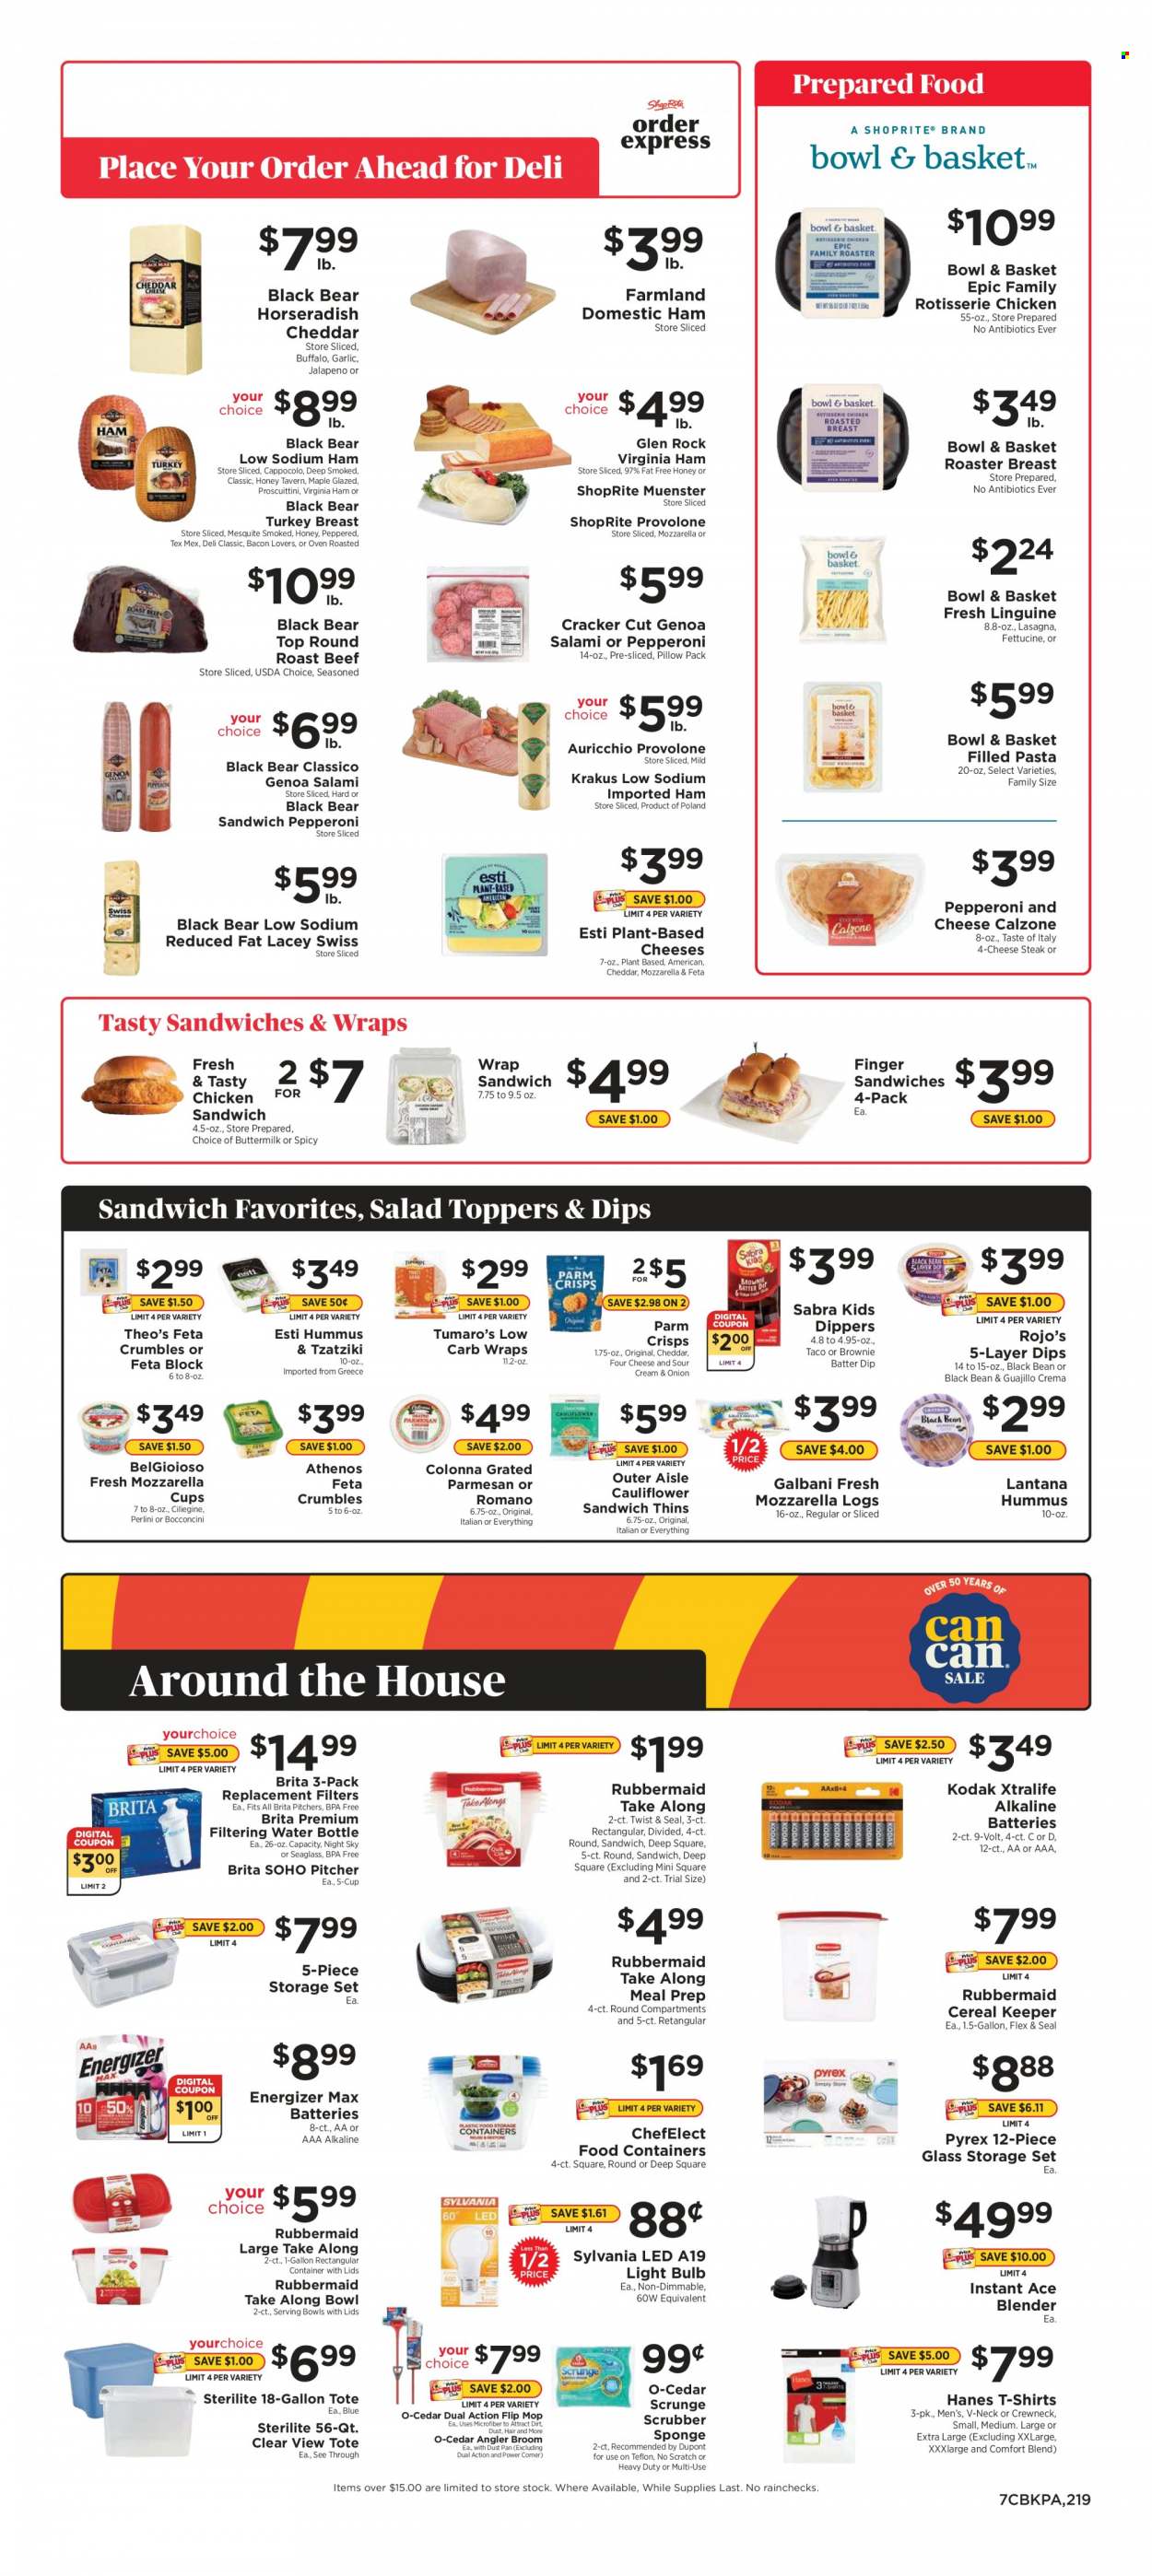 thumbnail - ShopRite Flyer - 01/02/2022 - 01/08/2022 - Sales products - Bowl & Basket, Ace, wraps, brownies, garlic, horseradish, salad, jalapeño, chicken roast, sandwich, pasta, lasagna meal, calzone, filled pasta, bacon, salami, ham, virginia ham, pepperoni, tzatziki, hummus, bocconcini, mozzarella, cheddar, parmesan, Münster cheese, feta, Galbani, Provolone, buttermilk, dip, crackers, Thins, cereals, Classico, turkey breast, beef meat, round roast, roast beef, sponge, mop, broom, angle broom, pitcher, drink bottle, cup, serving bowl, Pyrex, container, storage container set, battery, bulb, Energizer, light bulb, Sylvania, alkaline batteries. Page 7.